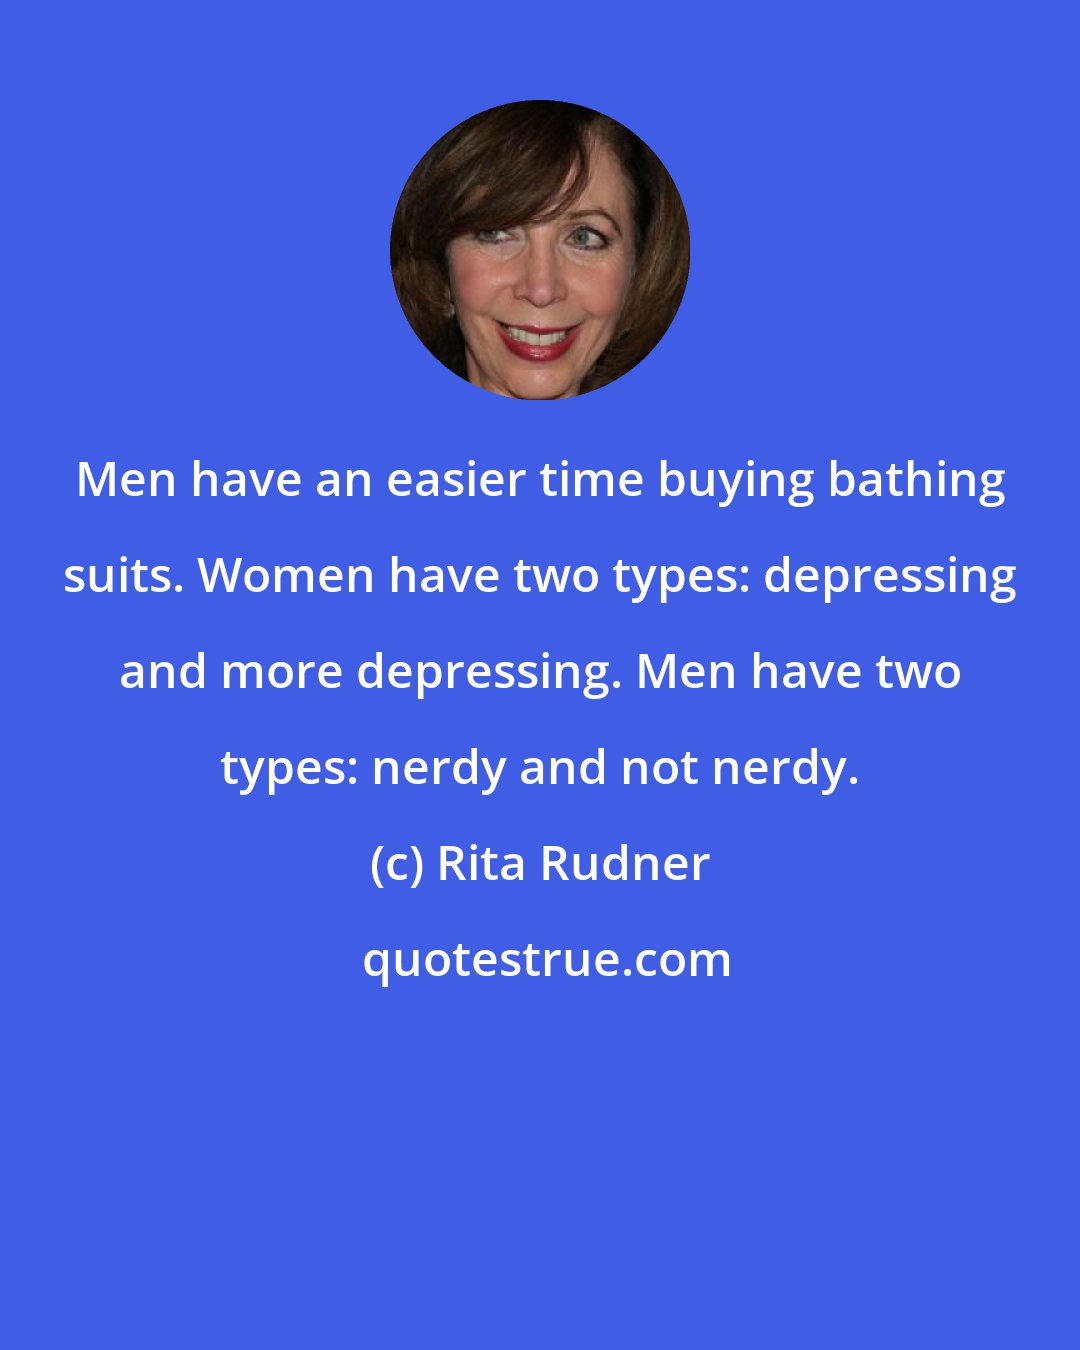 Rita Rudner: Men have an easier time buying bathing suits. Women have two types: depressing and more depressing. Men have two types: nerdy and not nerdy.